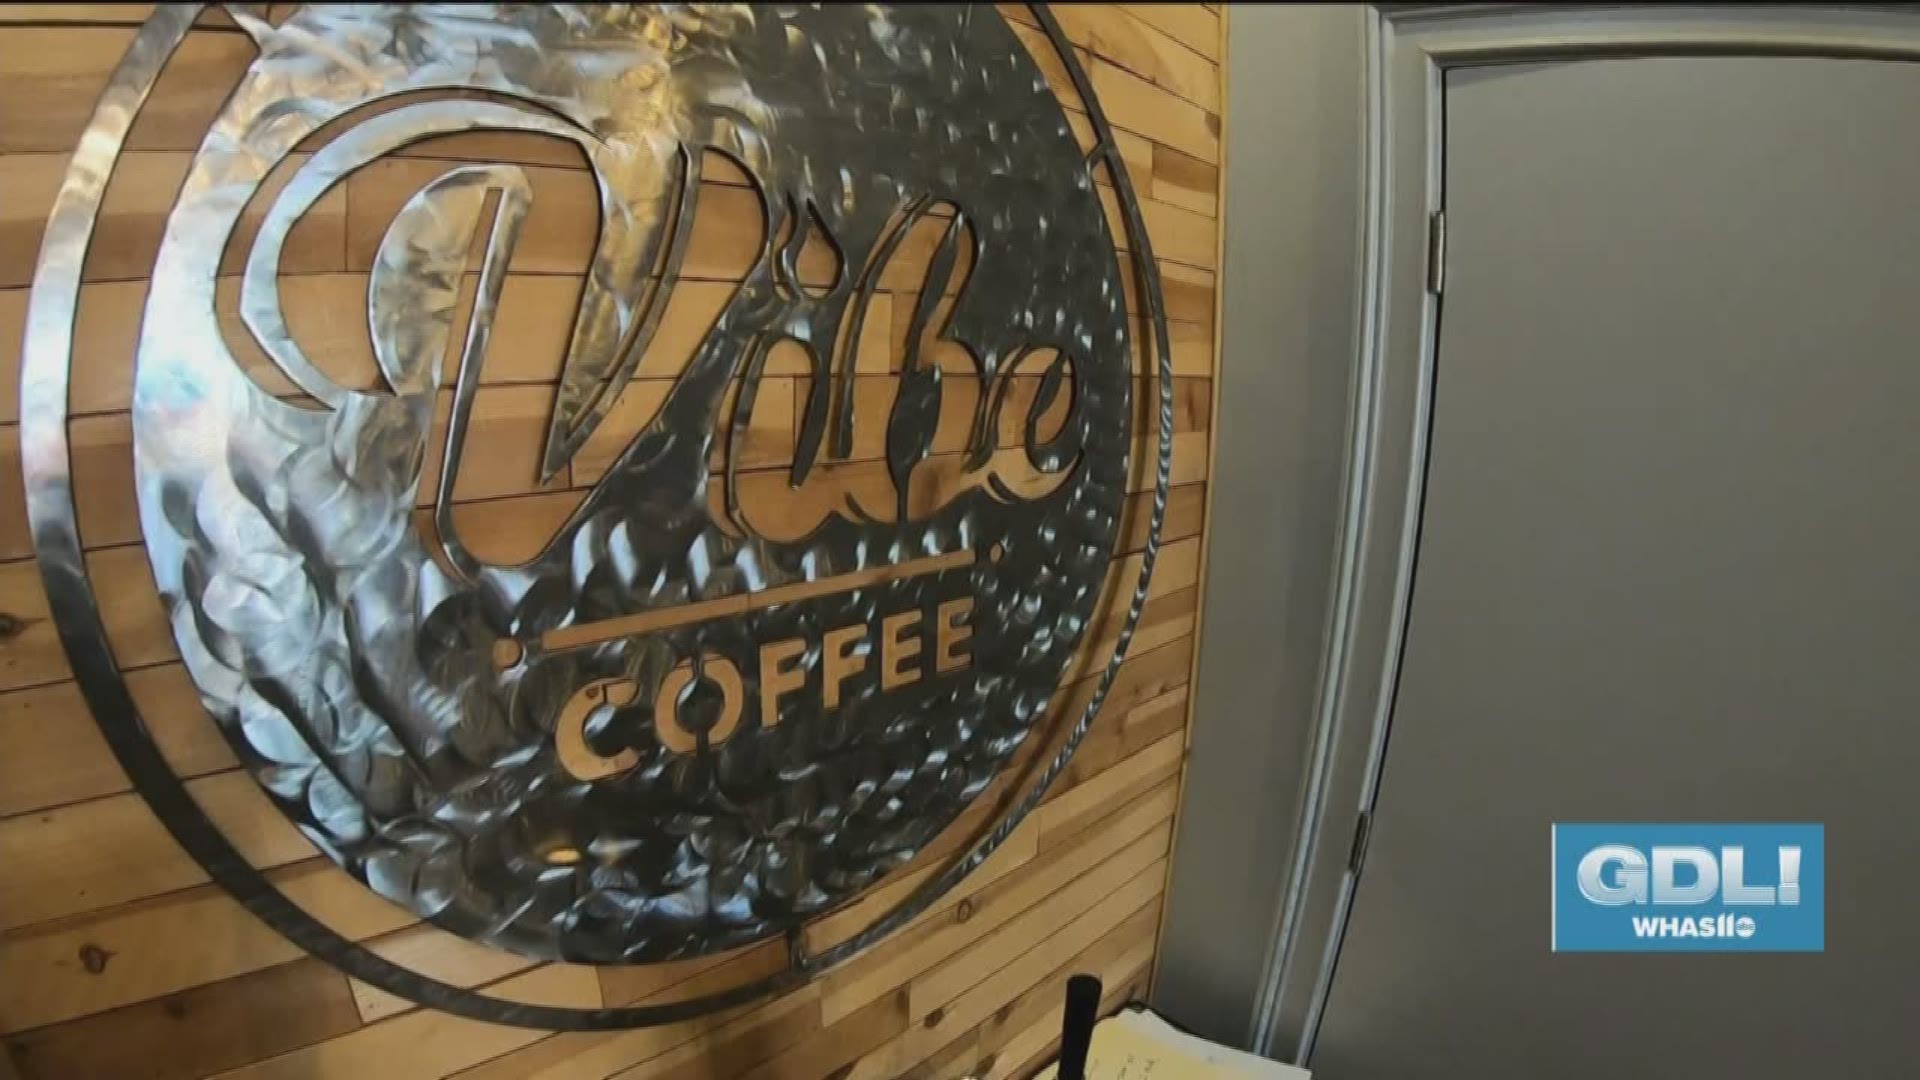 Vibe Coffee is located at 34 Public Square in Elizabethtown, KY. For more information, call 270-506-3072 or go to VibeCofeeShop.com.